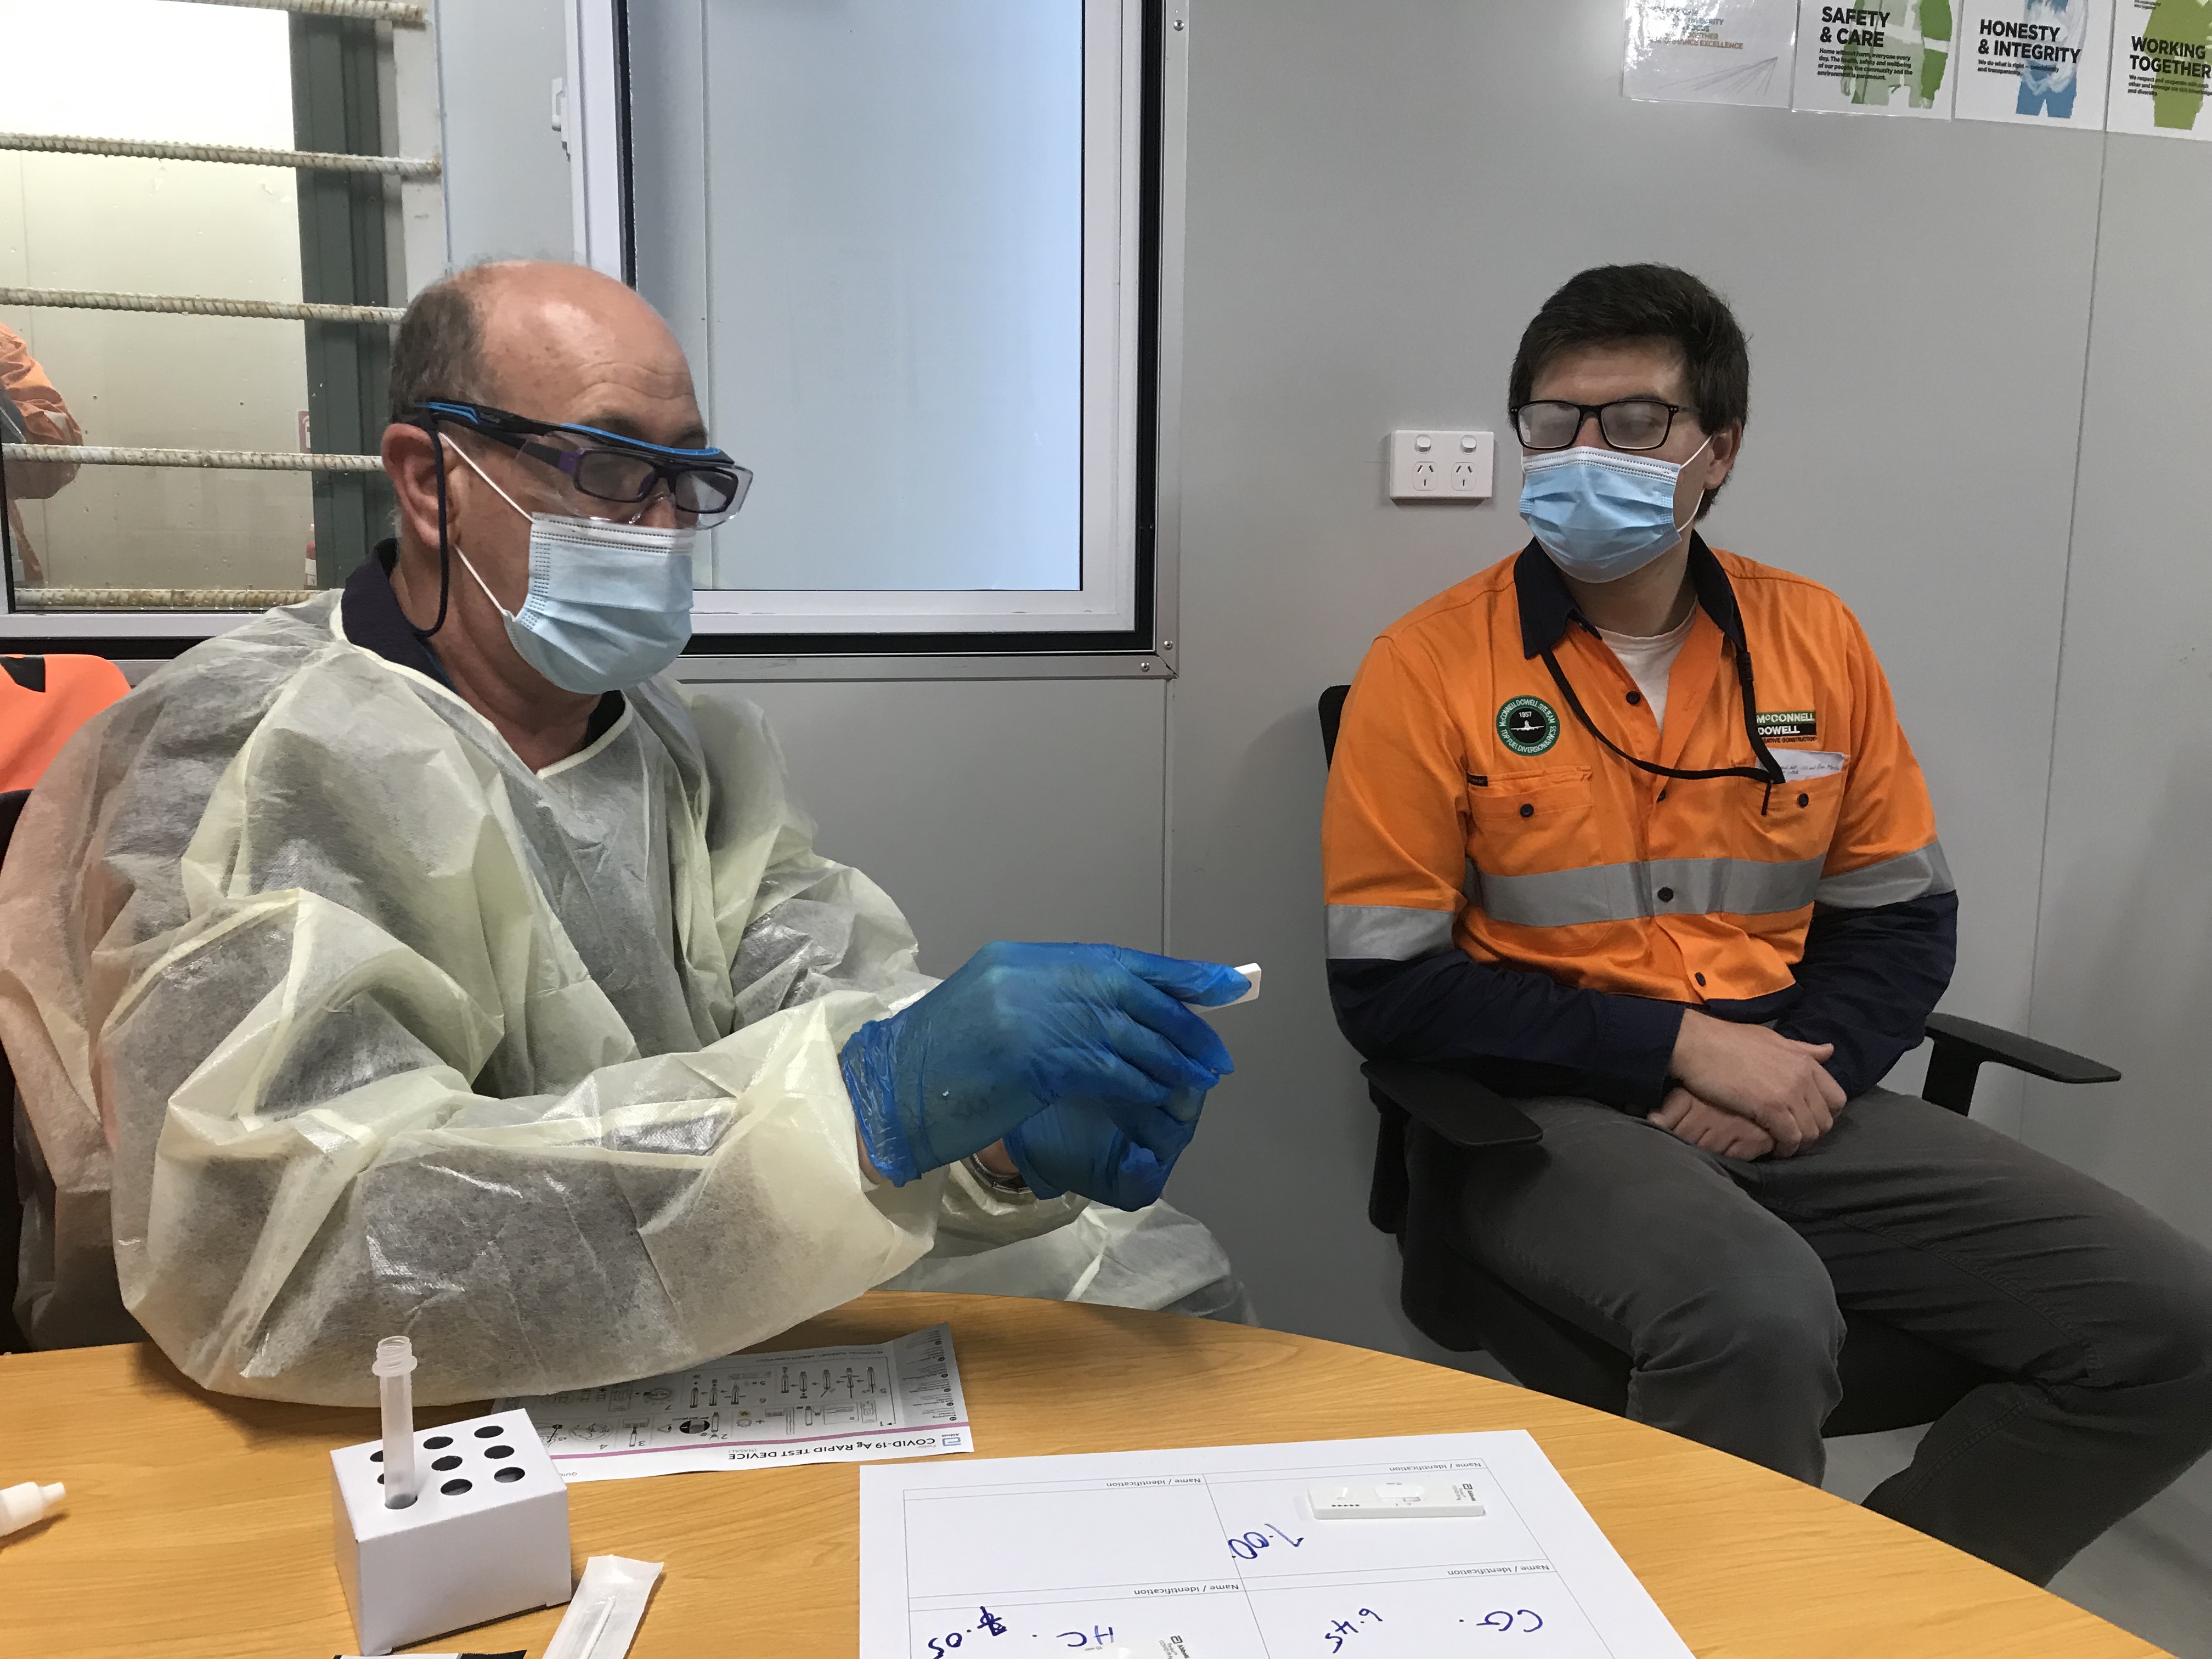 image shows two men in surgical masks sitting in an office ready to give and receive a rapid antigen test.